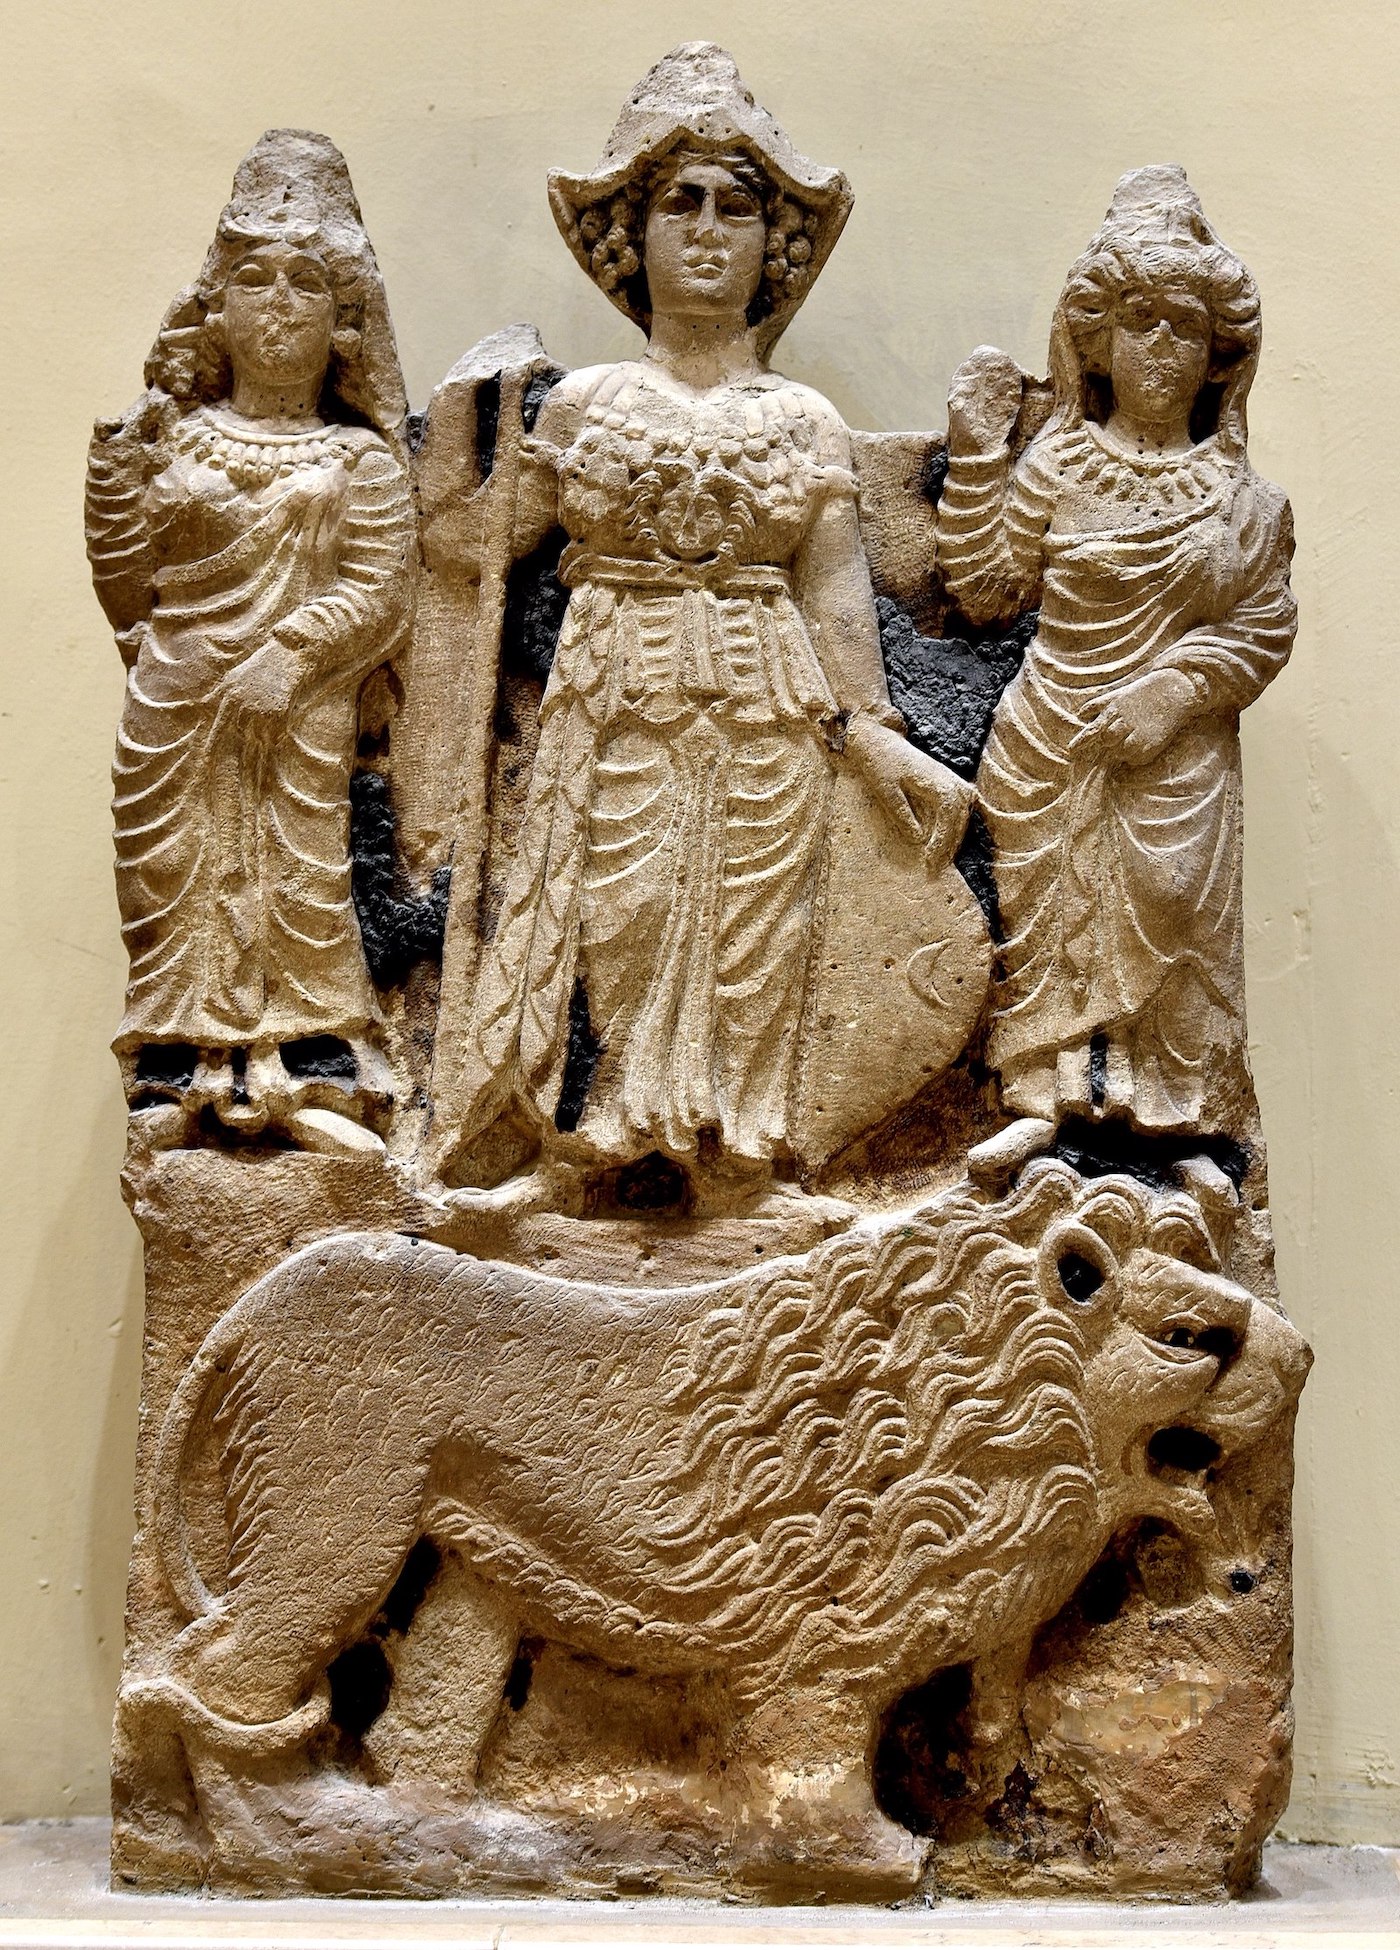 A carved relief of three women that may represent the pre-Islamic goddesses Manat, Allat, and al-Uzza